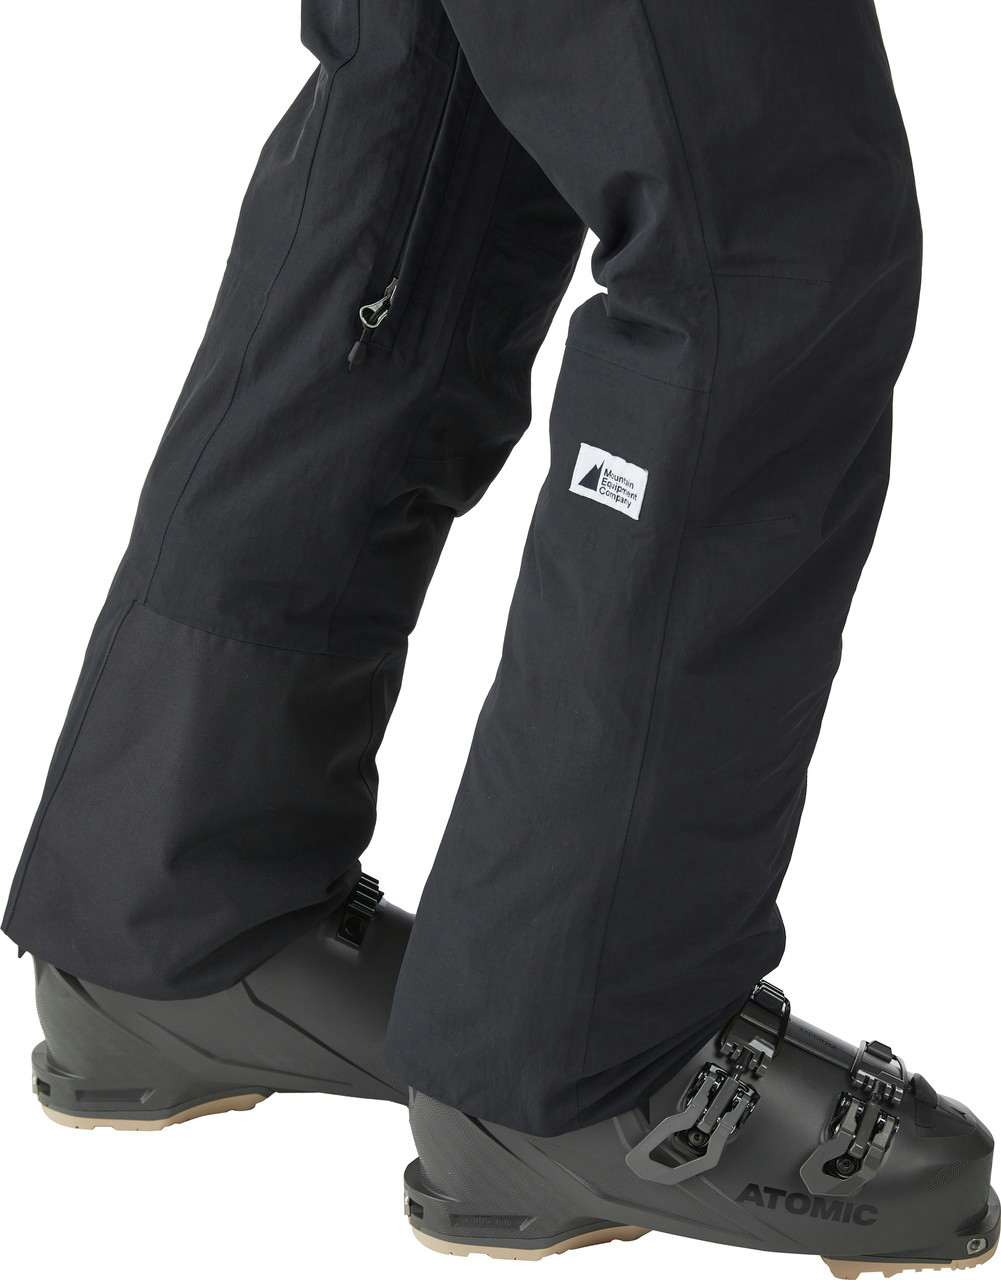 Fall-Line Insulated Pants Black